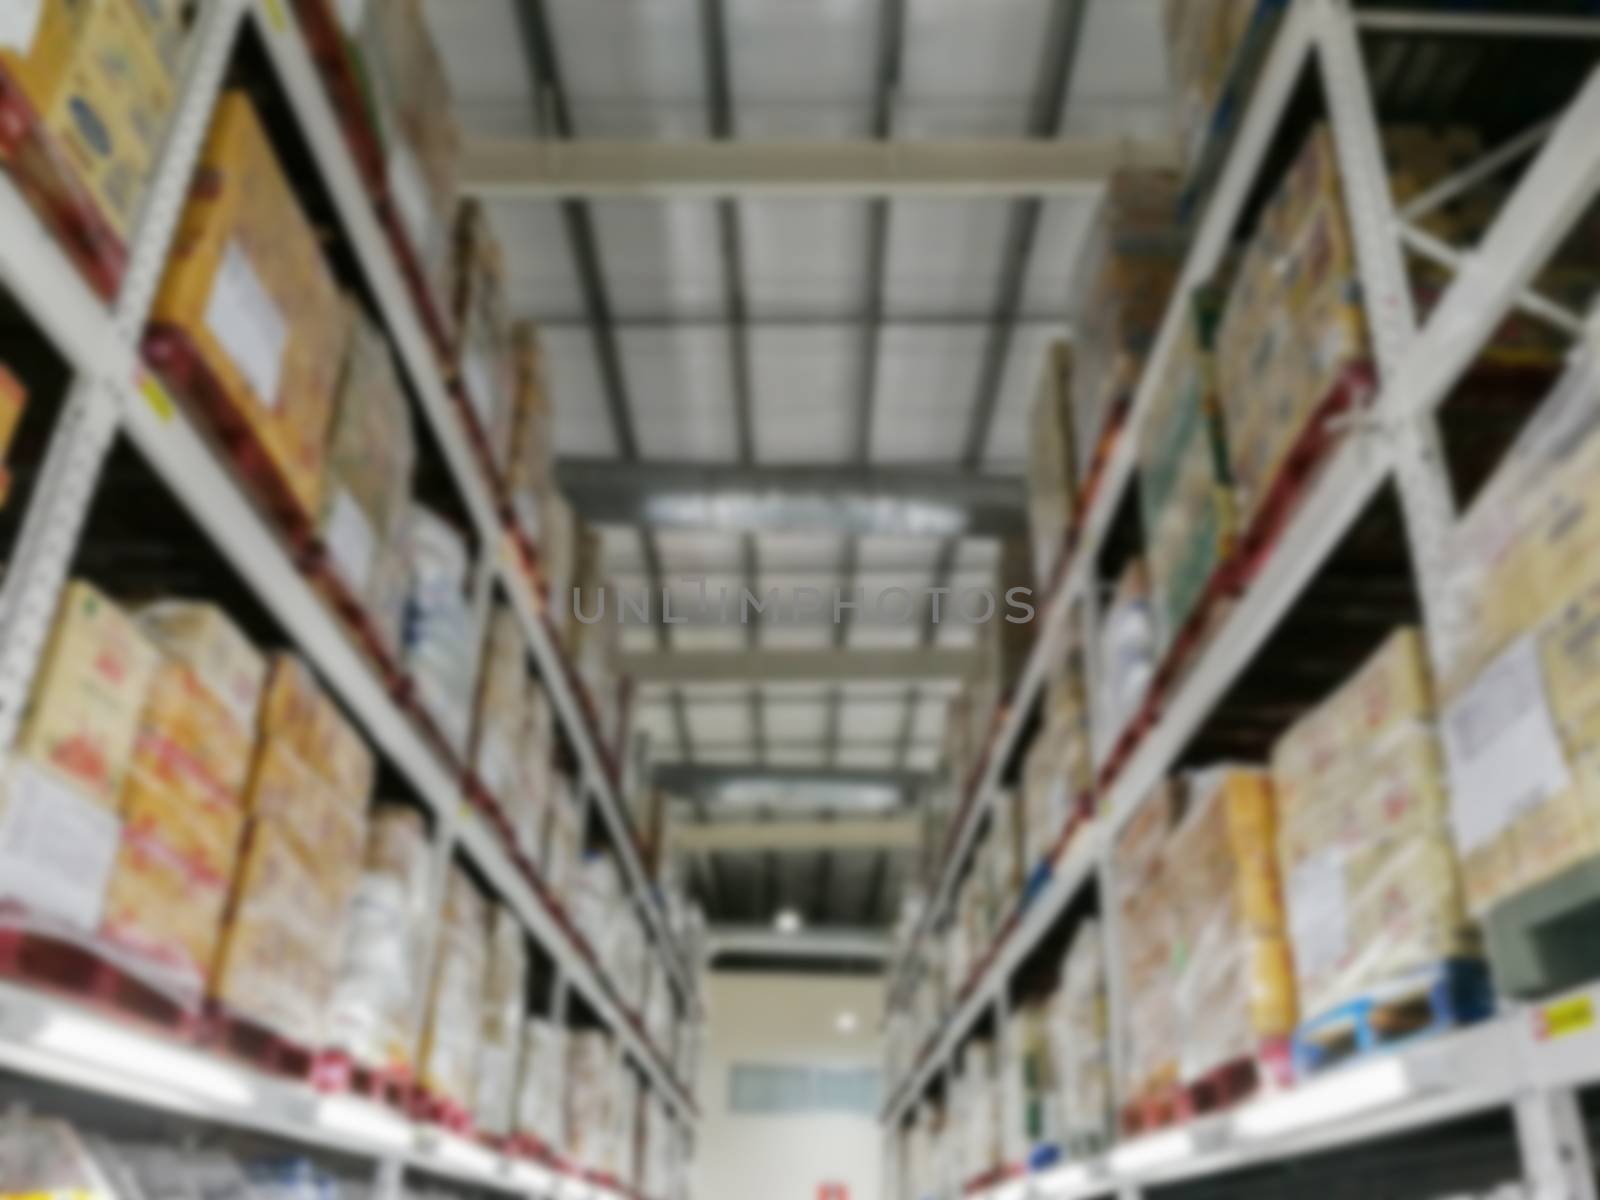 Warehouse storage of goods in warehouses, blurred images